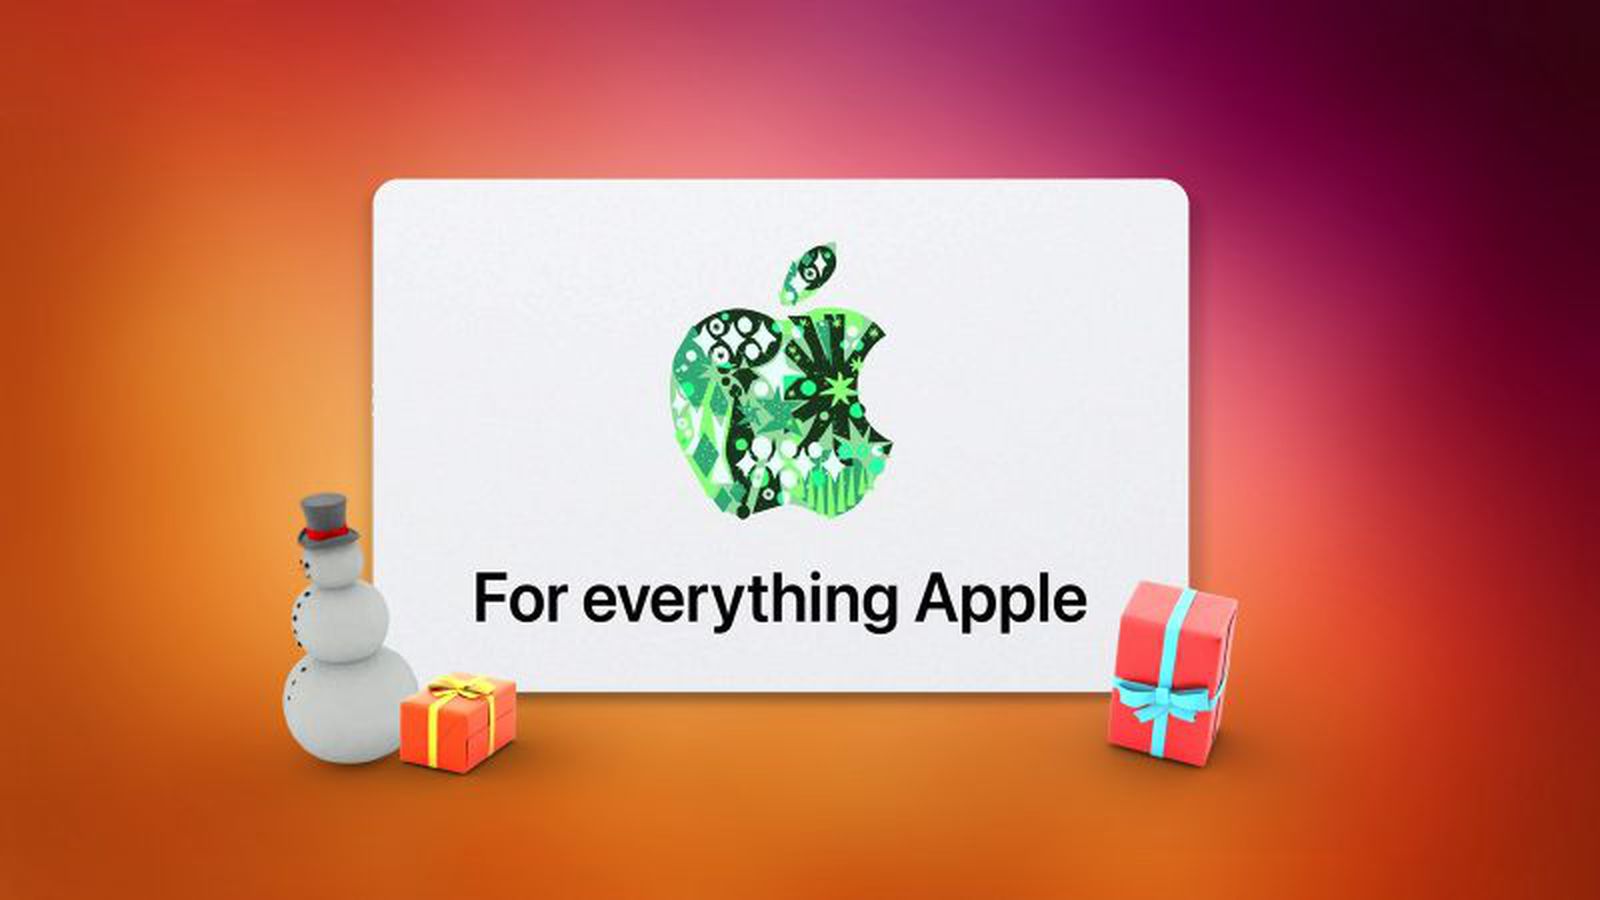 What to Buy Card MacRumors Apple - the Gift With You Unwrapped